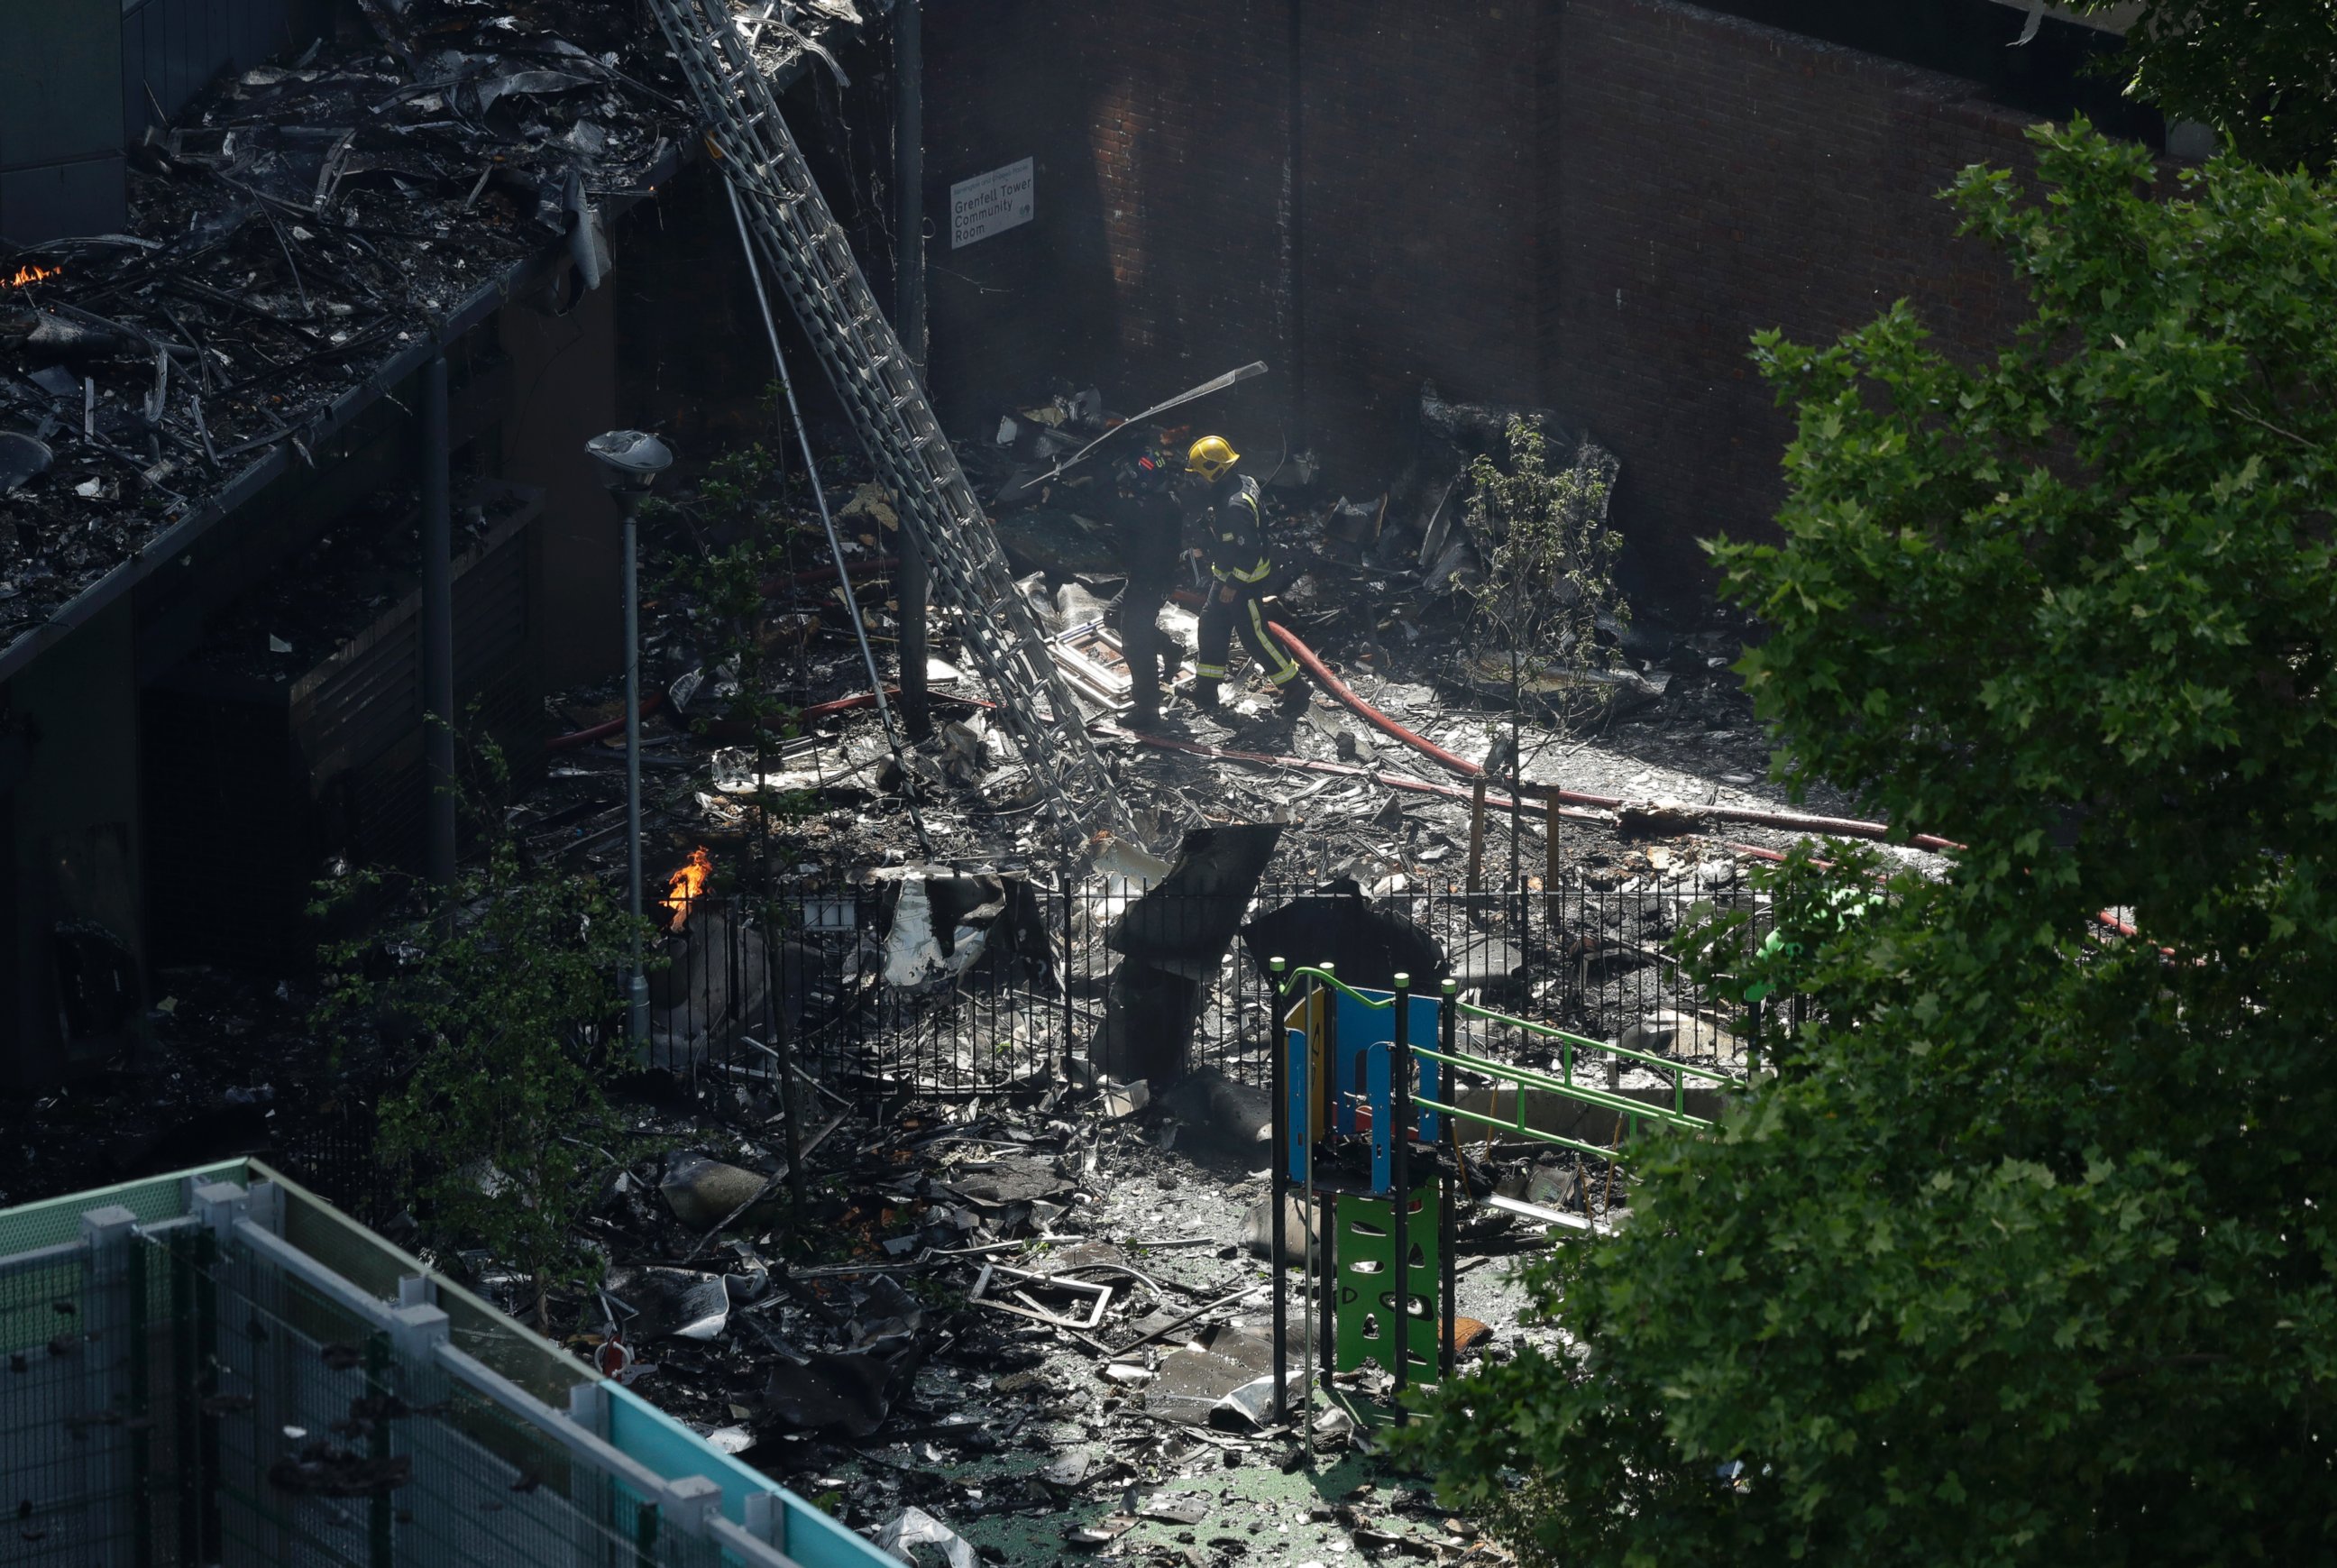 PHOTO: Firefighters battle a massive fire that raged in a high-rise apartment building in London, June 14, 2017.